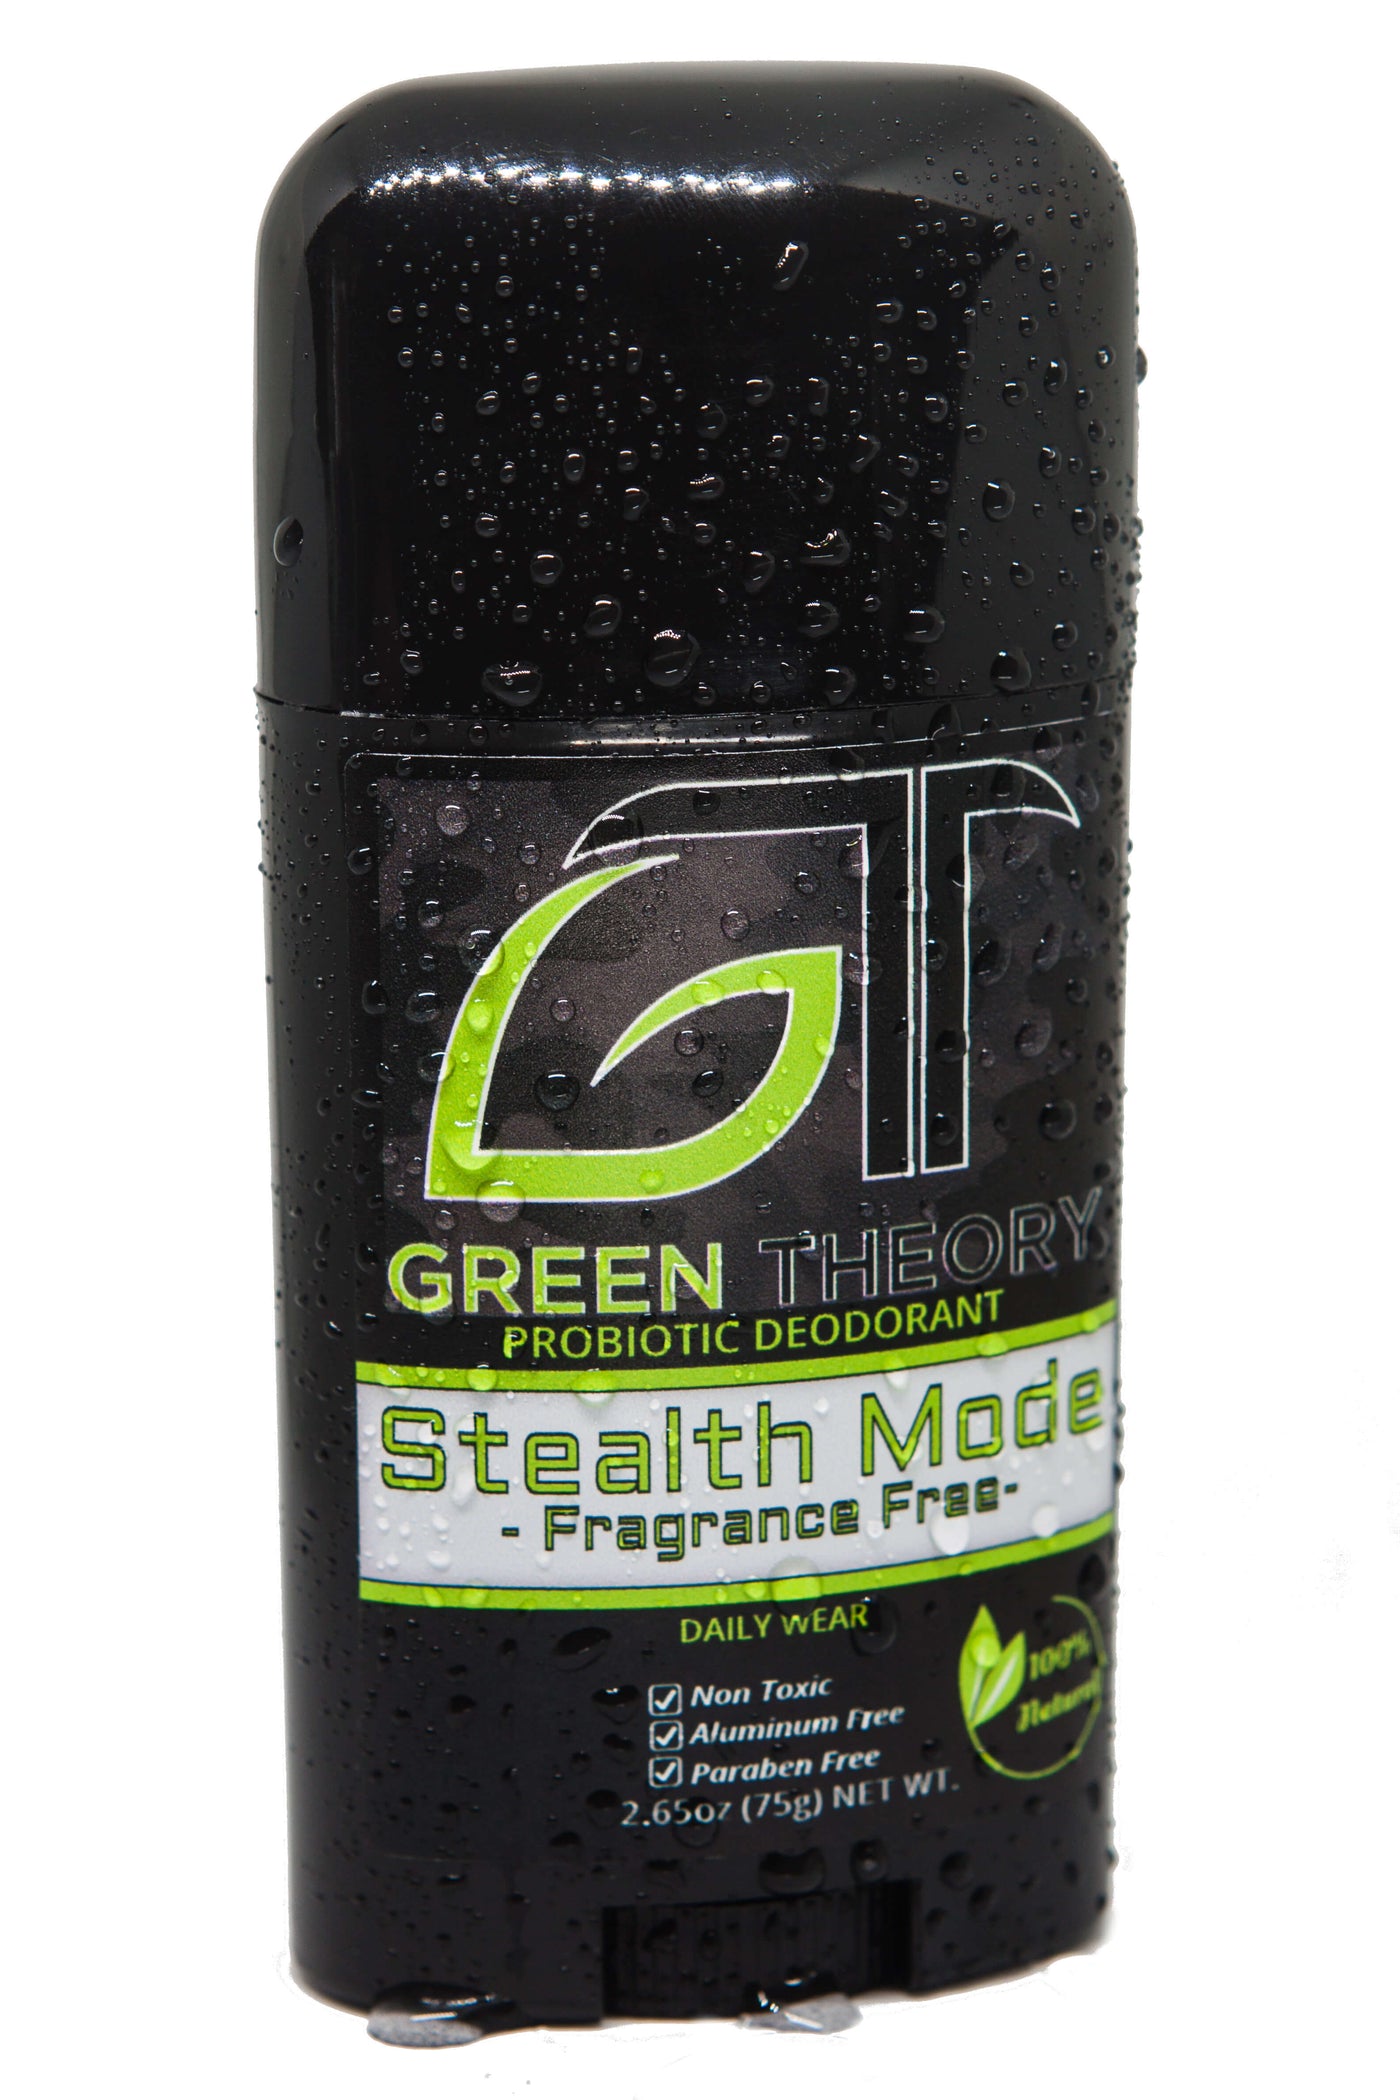 stealth mode fragrance free probiotic natural deodorant standing against a white background. Stick is covered in water droplets for effect.